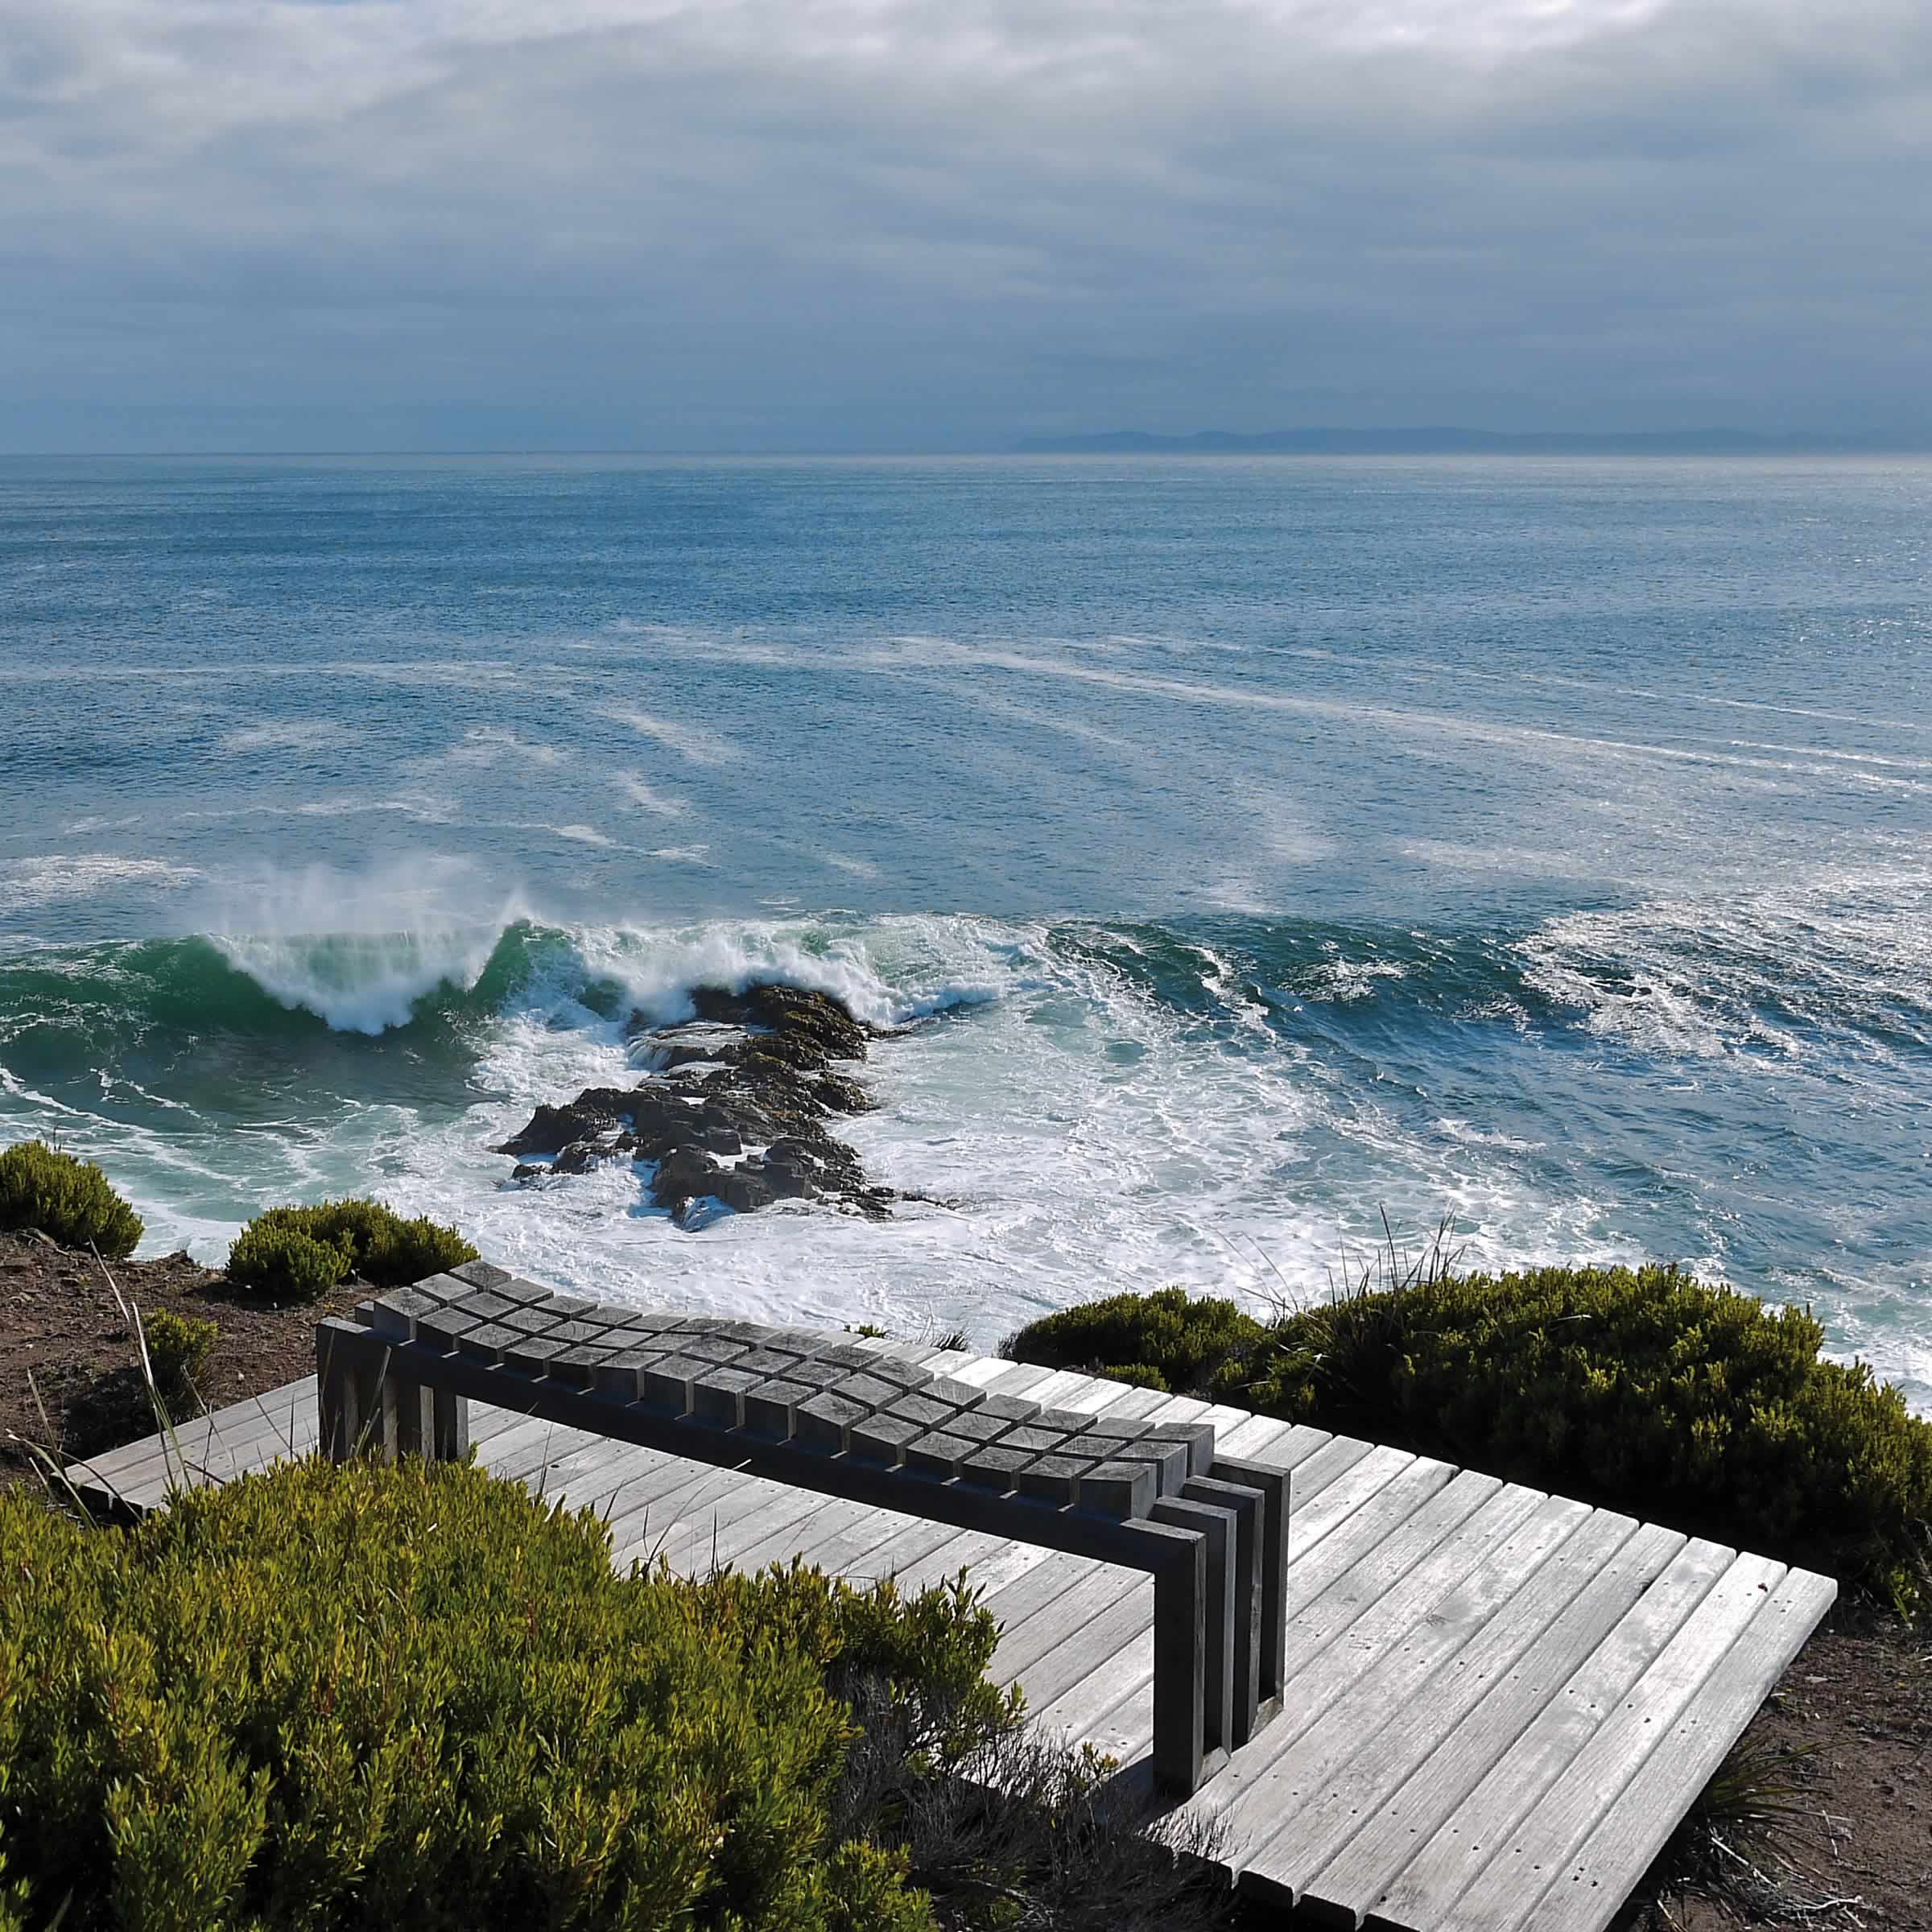 Photo of a rough sea with a black undulating bench seat on a timber platform in the foreground. Photo courtesy of Peter Adams.